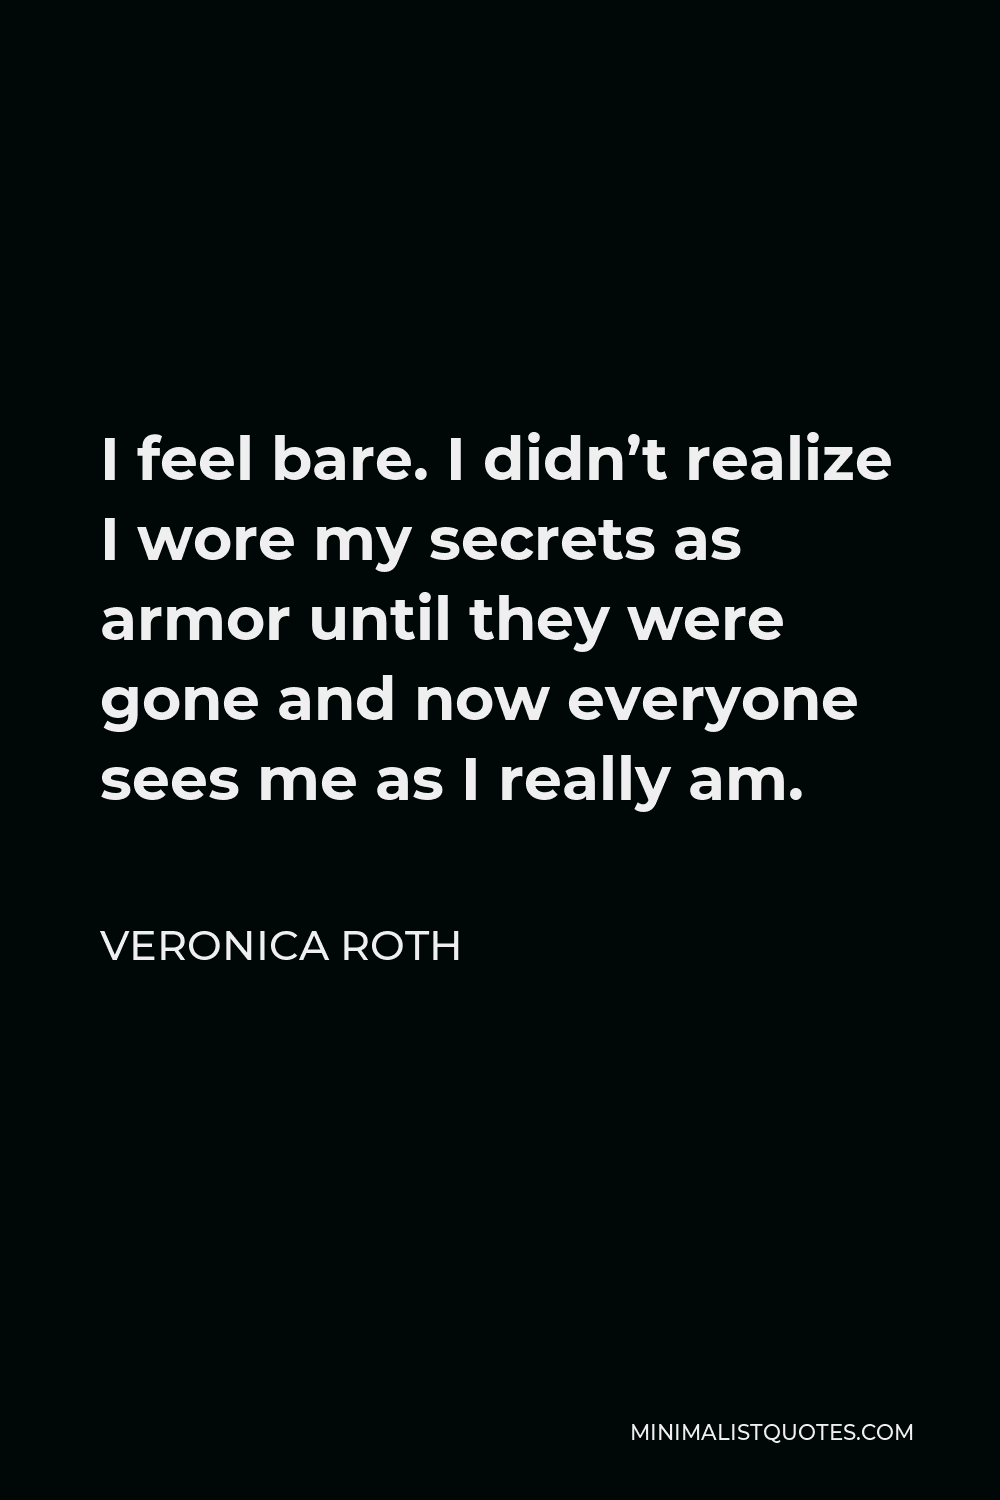 Veronica Roth Quote - I feel bare. I didn’t realize I wore my secrets as armor until they were gone and now everyone sees me as I really am.